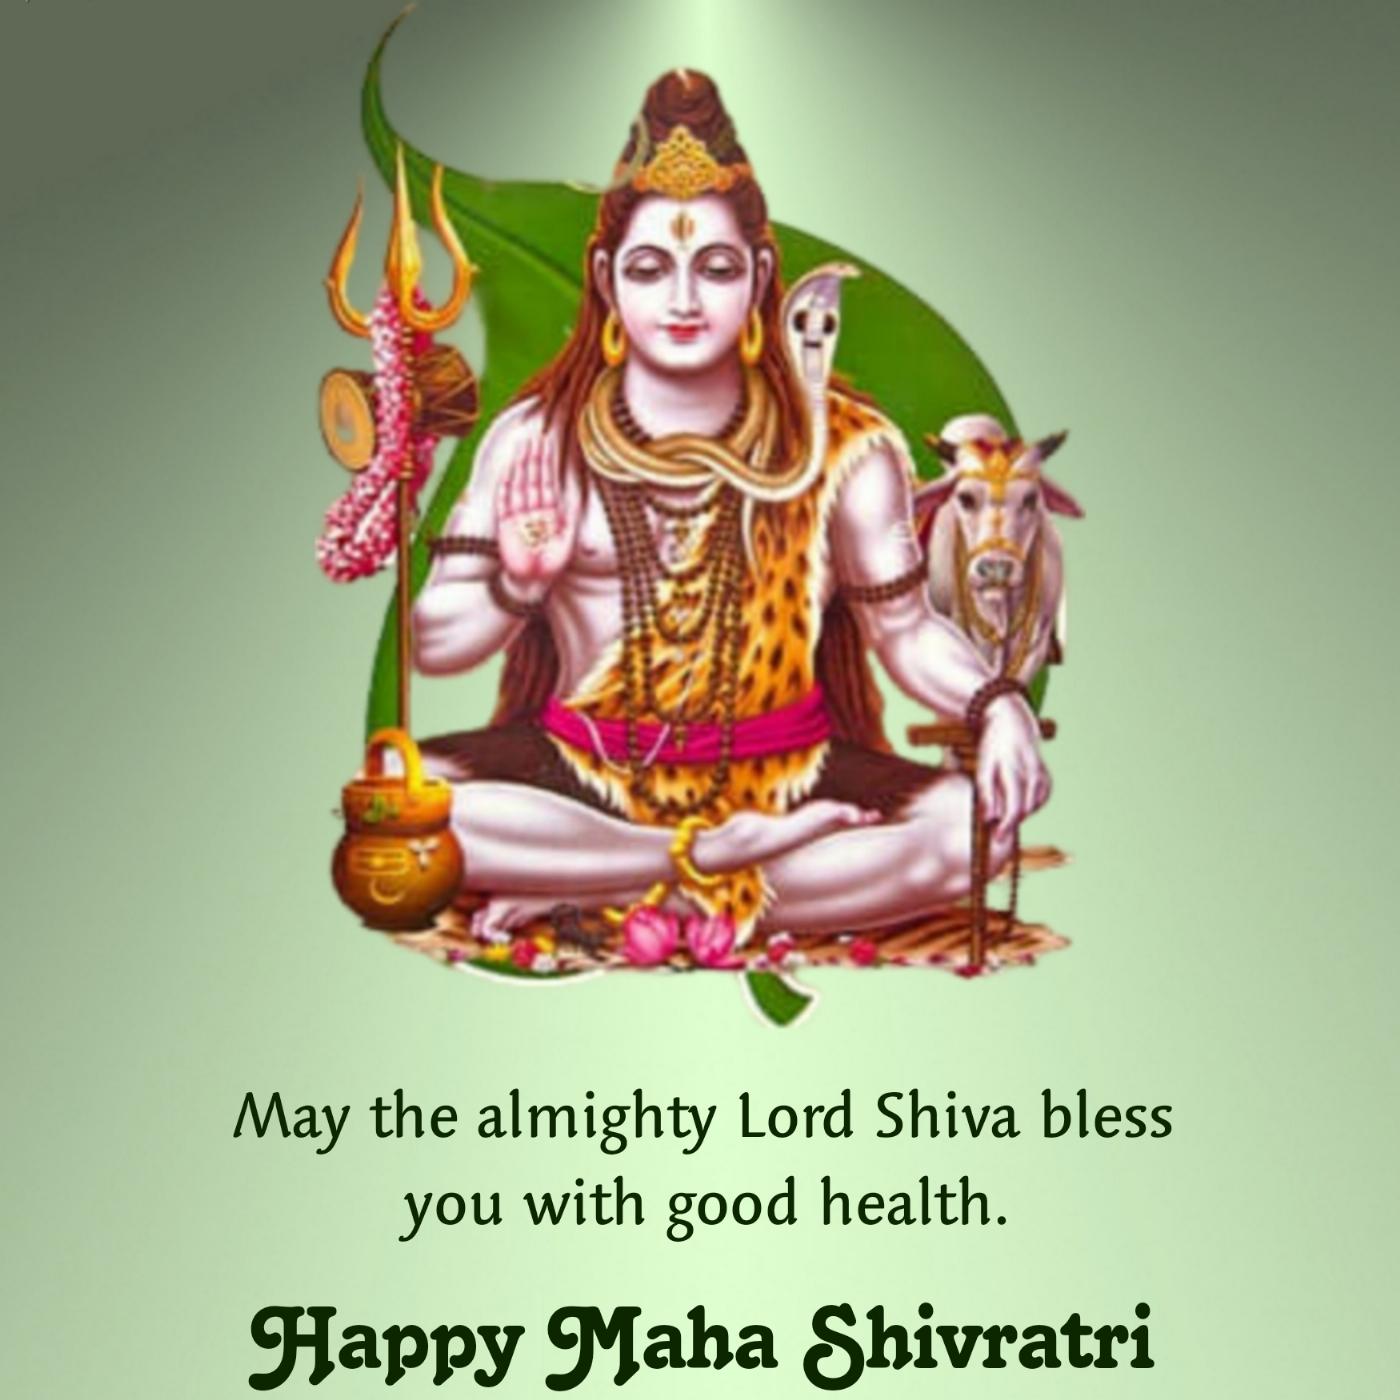 May the almighty Lord Shiva bless you with good health